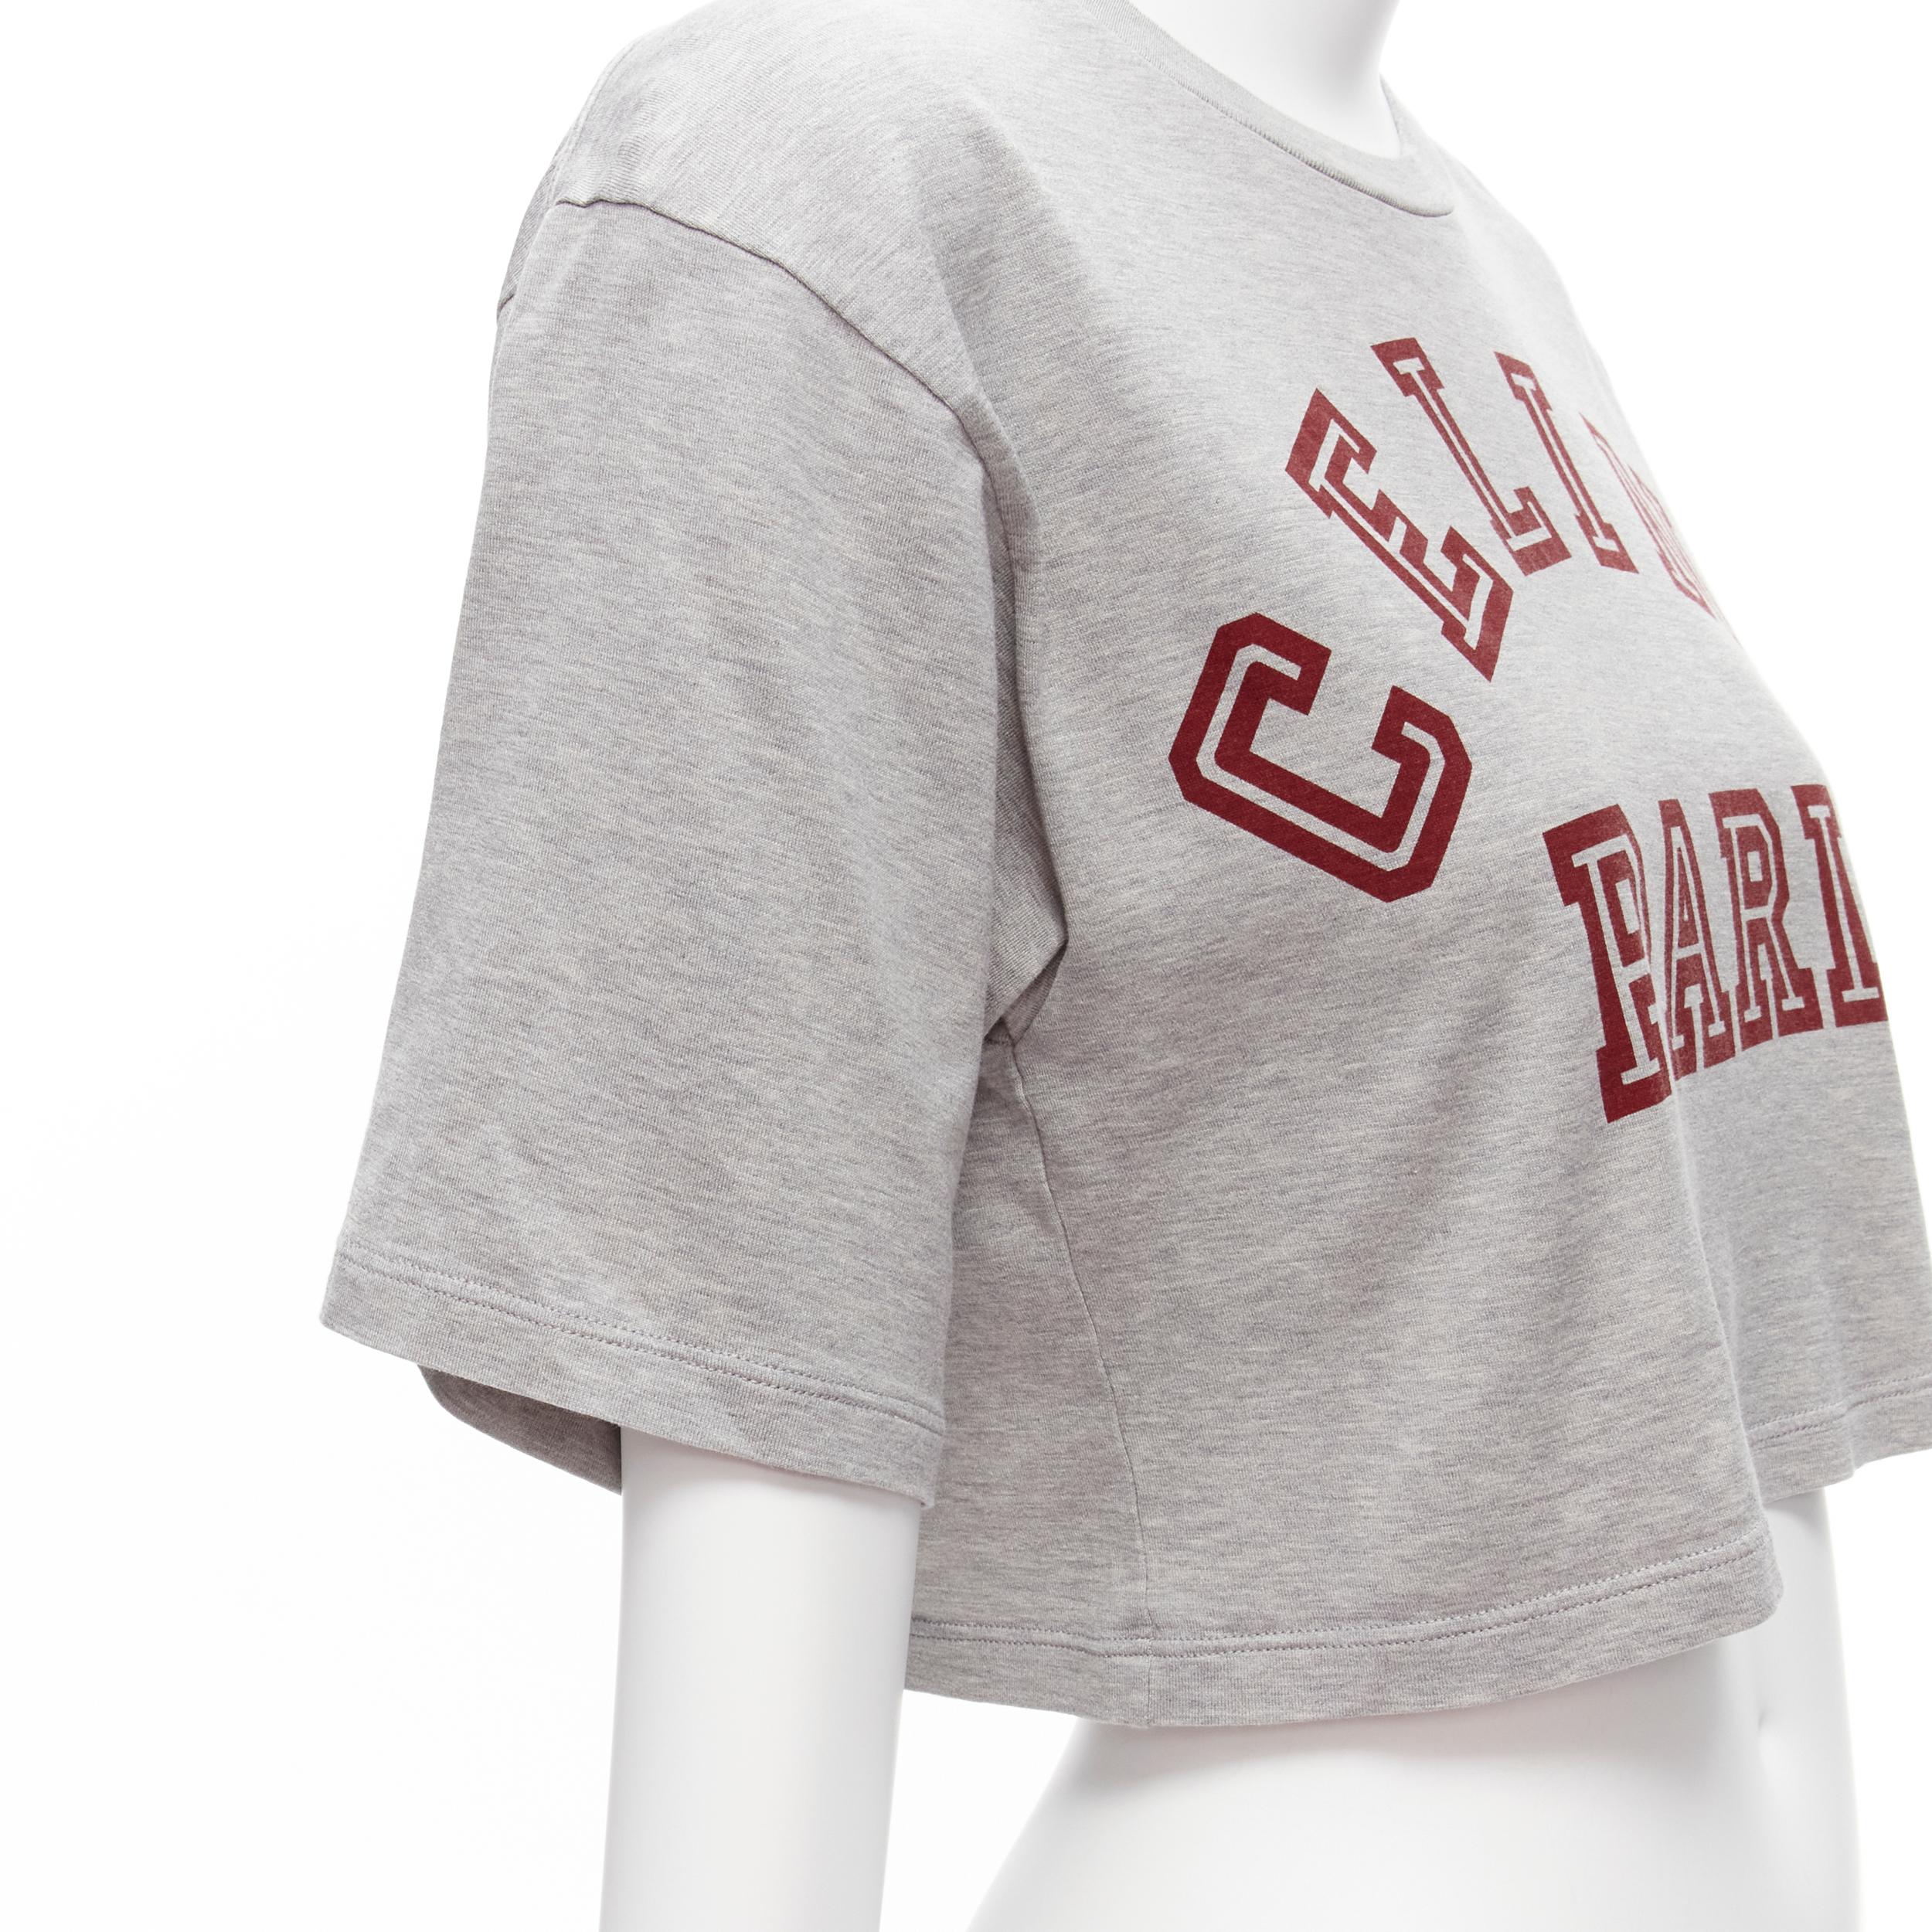 CELINE PARIS red logo grey cotton crew neck cropped tshirt XS
Reference: TGAS/D00088
Brand: Celine
Designer: Hedi Slimane
Material: Cotton
Color: Grey, Red
Pattern: Solid
Made in: Italy

CONDITION:
Condition: Excellent, this item was pre-owned and